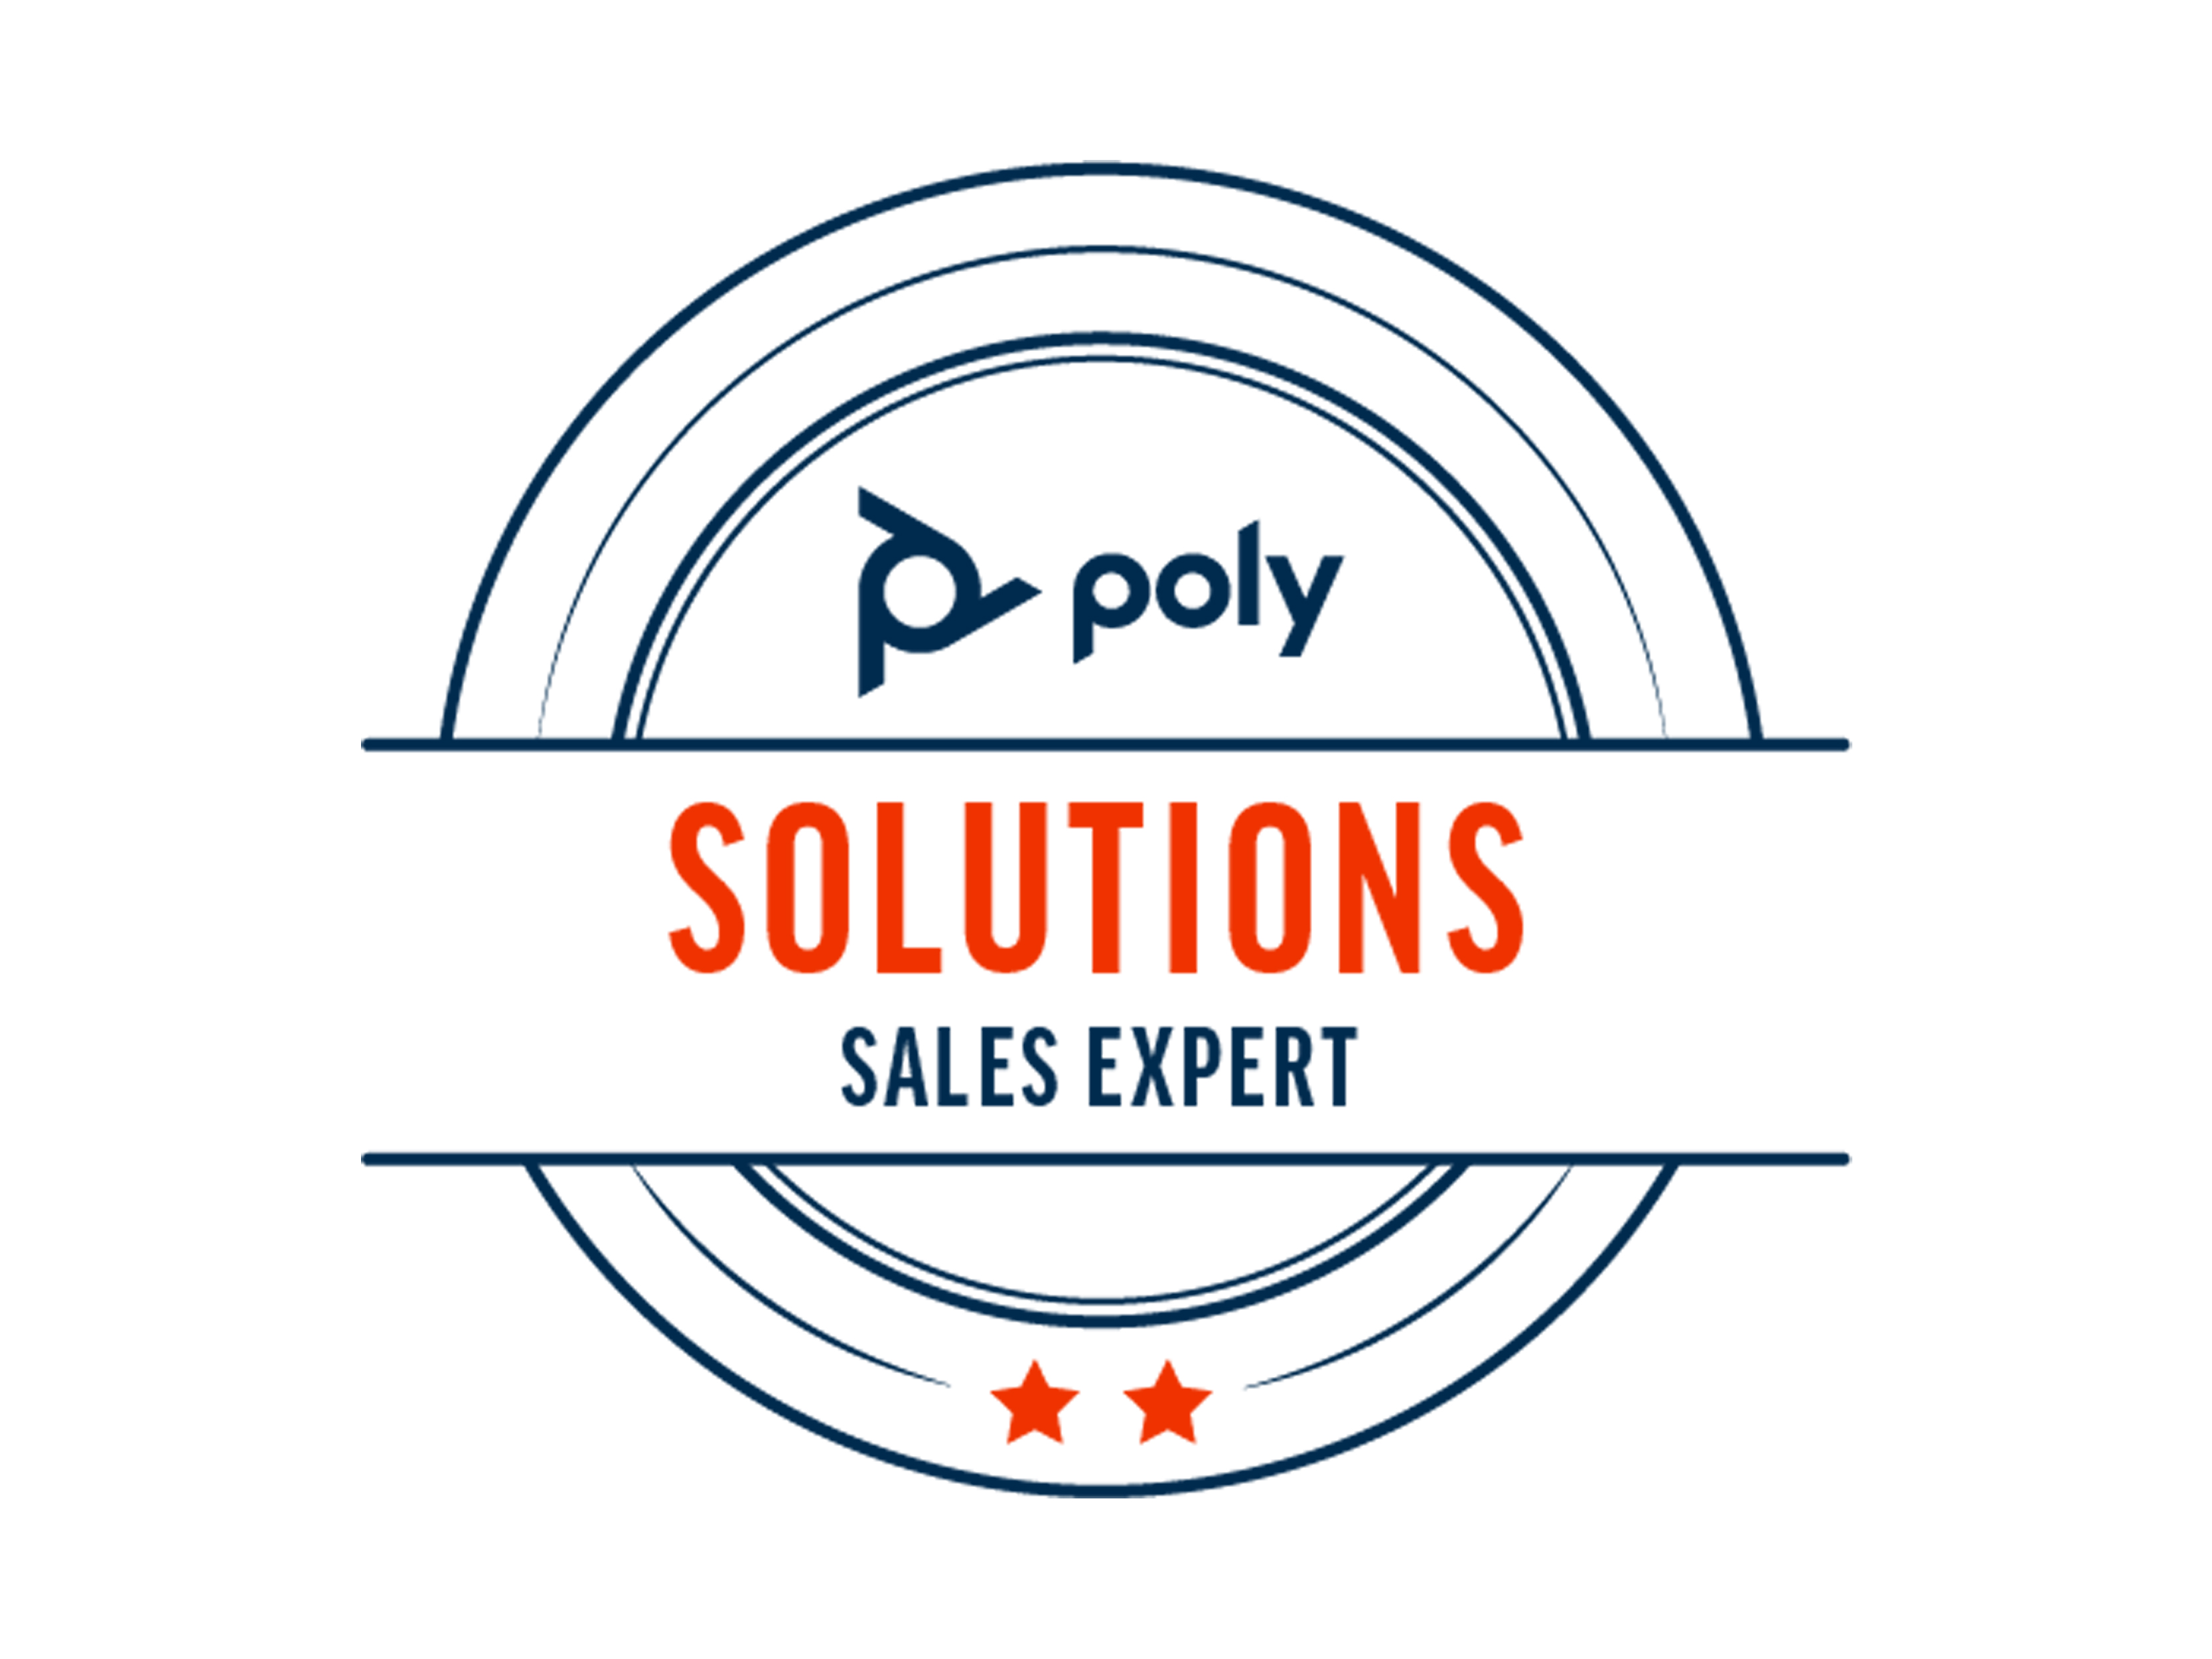 Poly Solutions Sales Expert